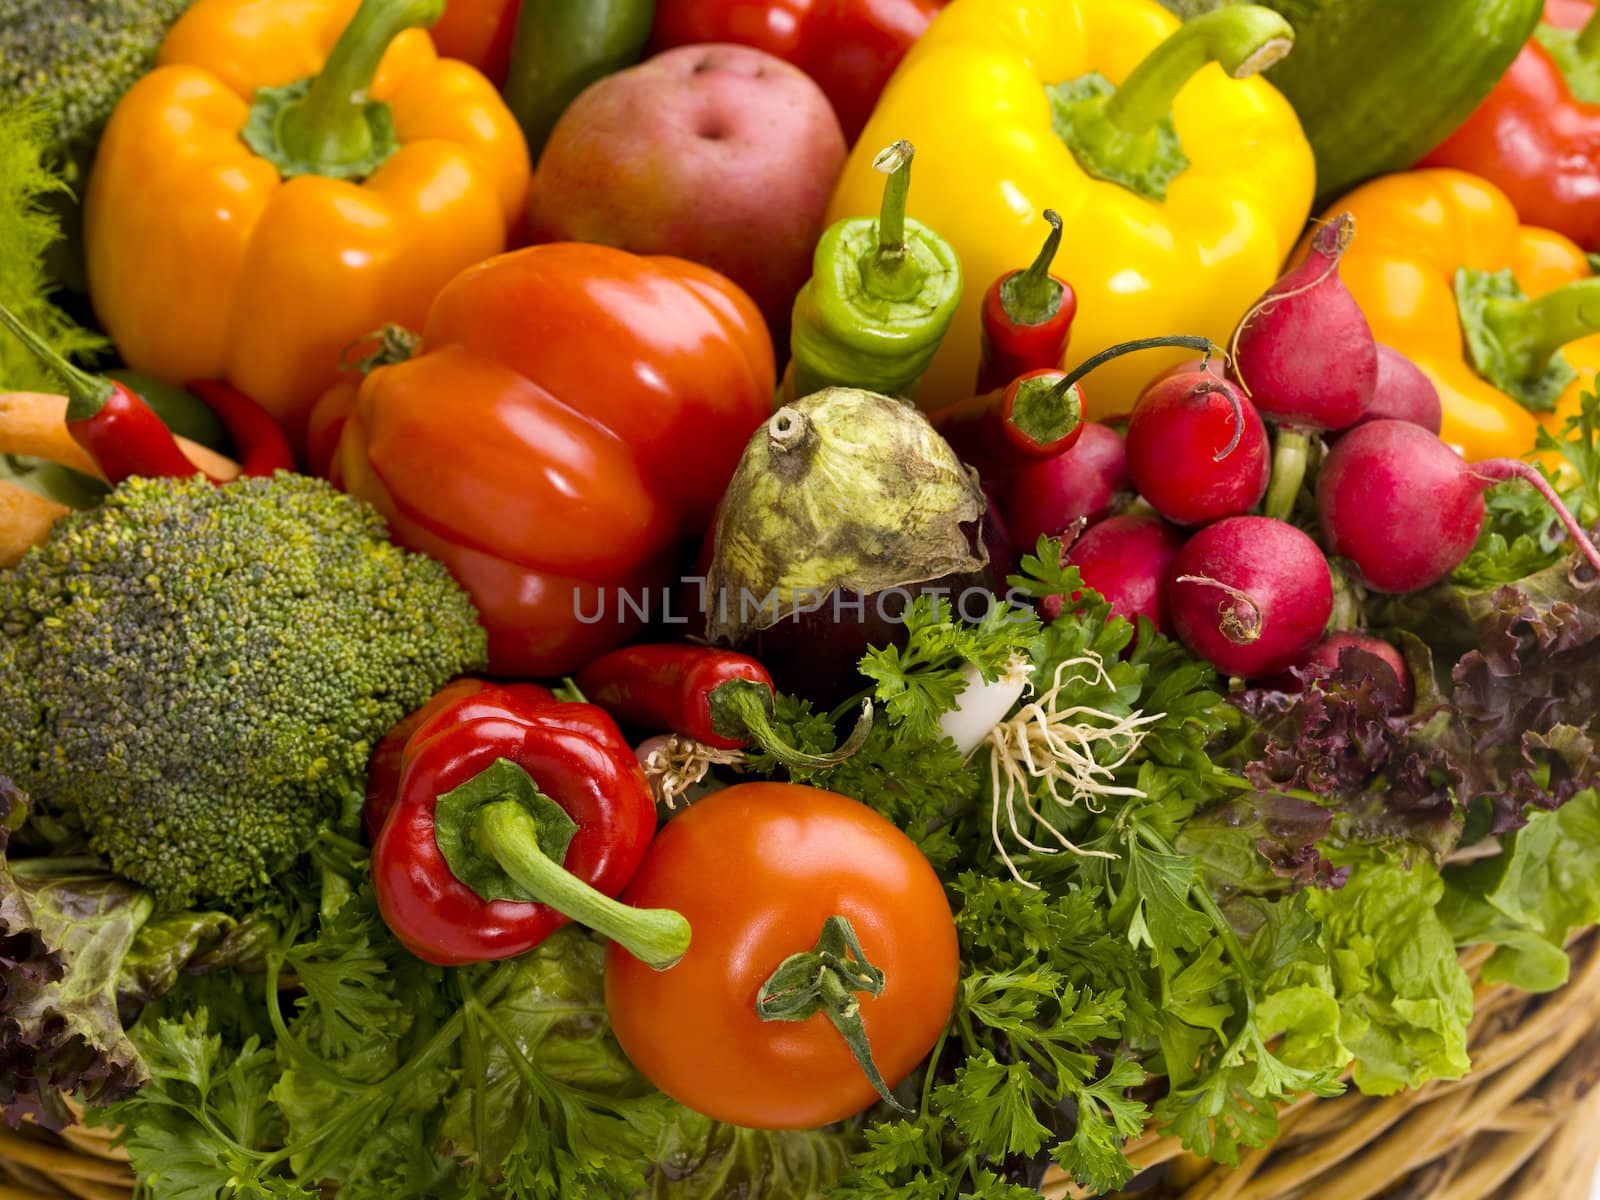 Close-up shot of a basket containing many vegetables.